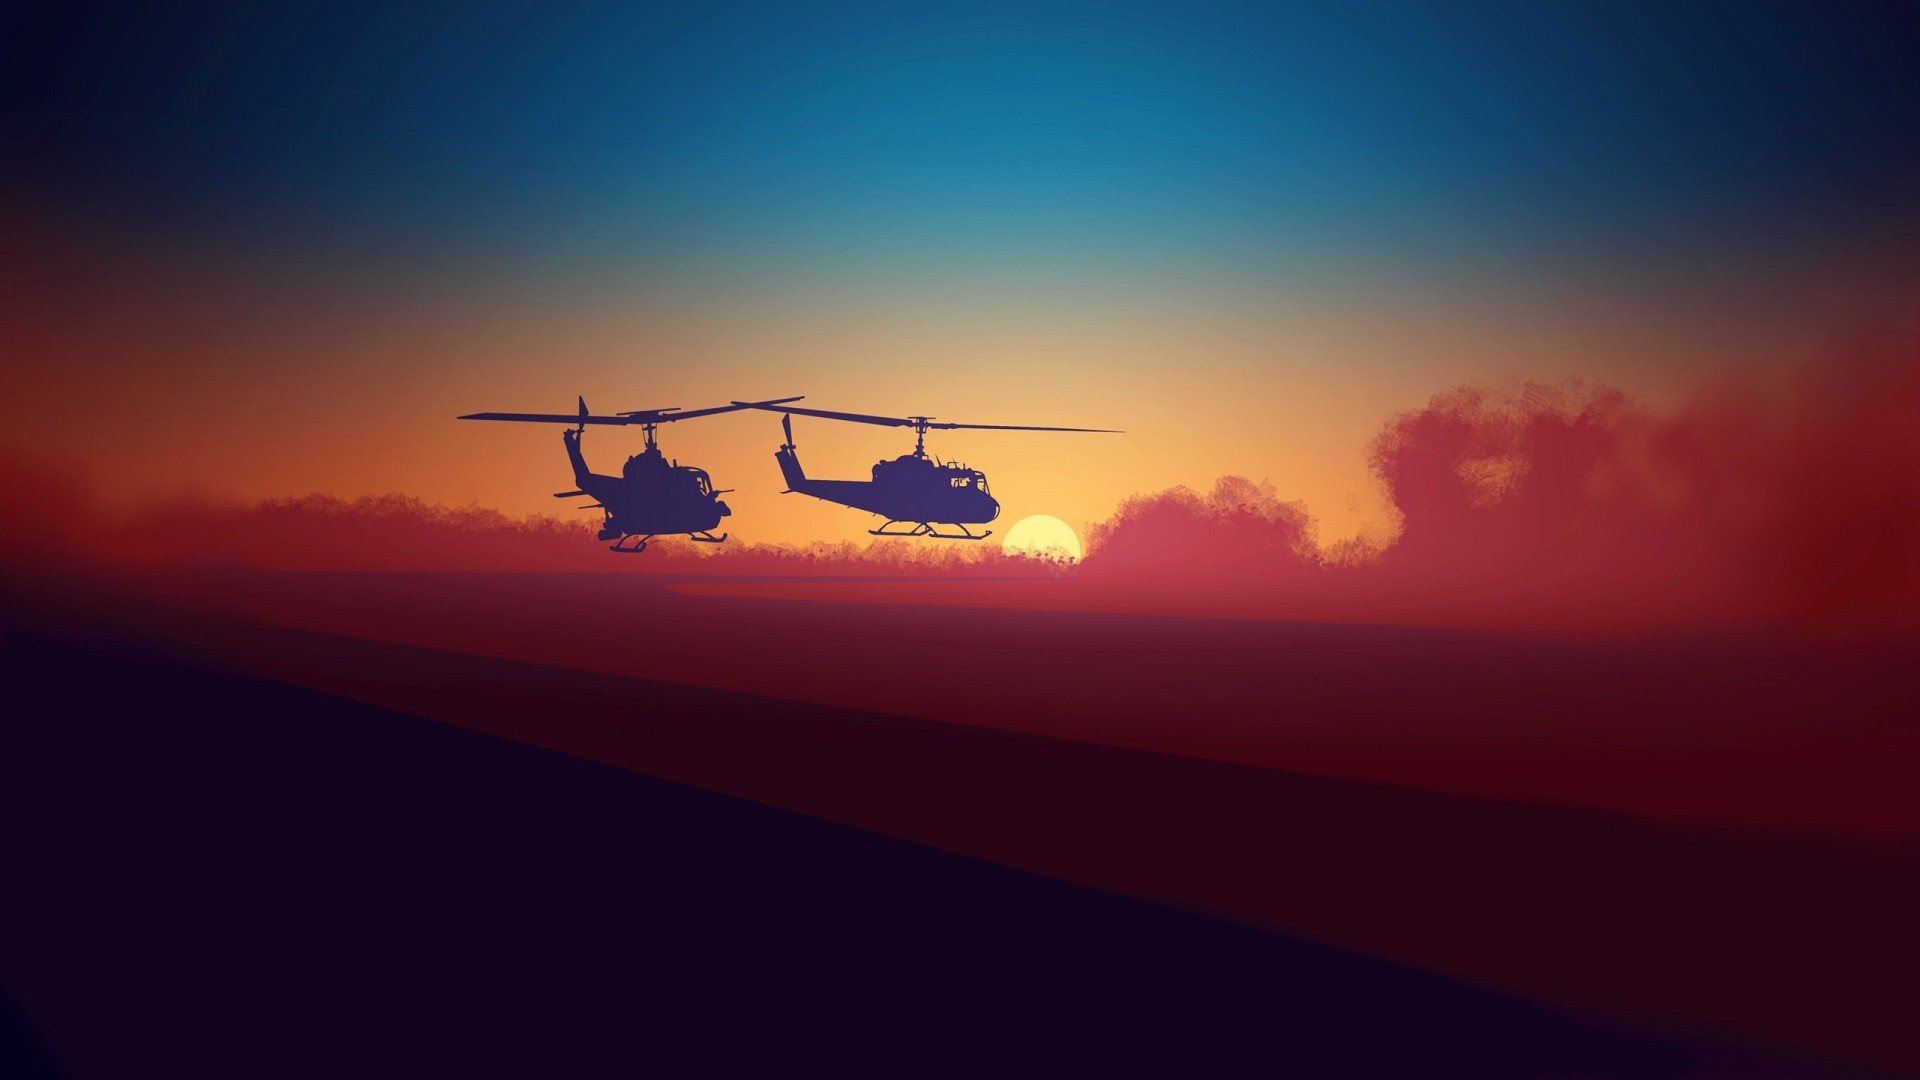 General 1920x1080 artwork helicopters colorful sand military military vehicle orange sky Sun sky landscape vehicle aircraft military aircraft silhouette Bell UH-1 Iroquois